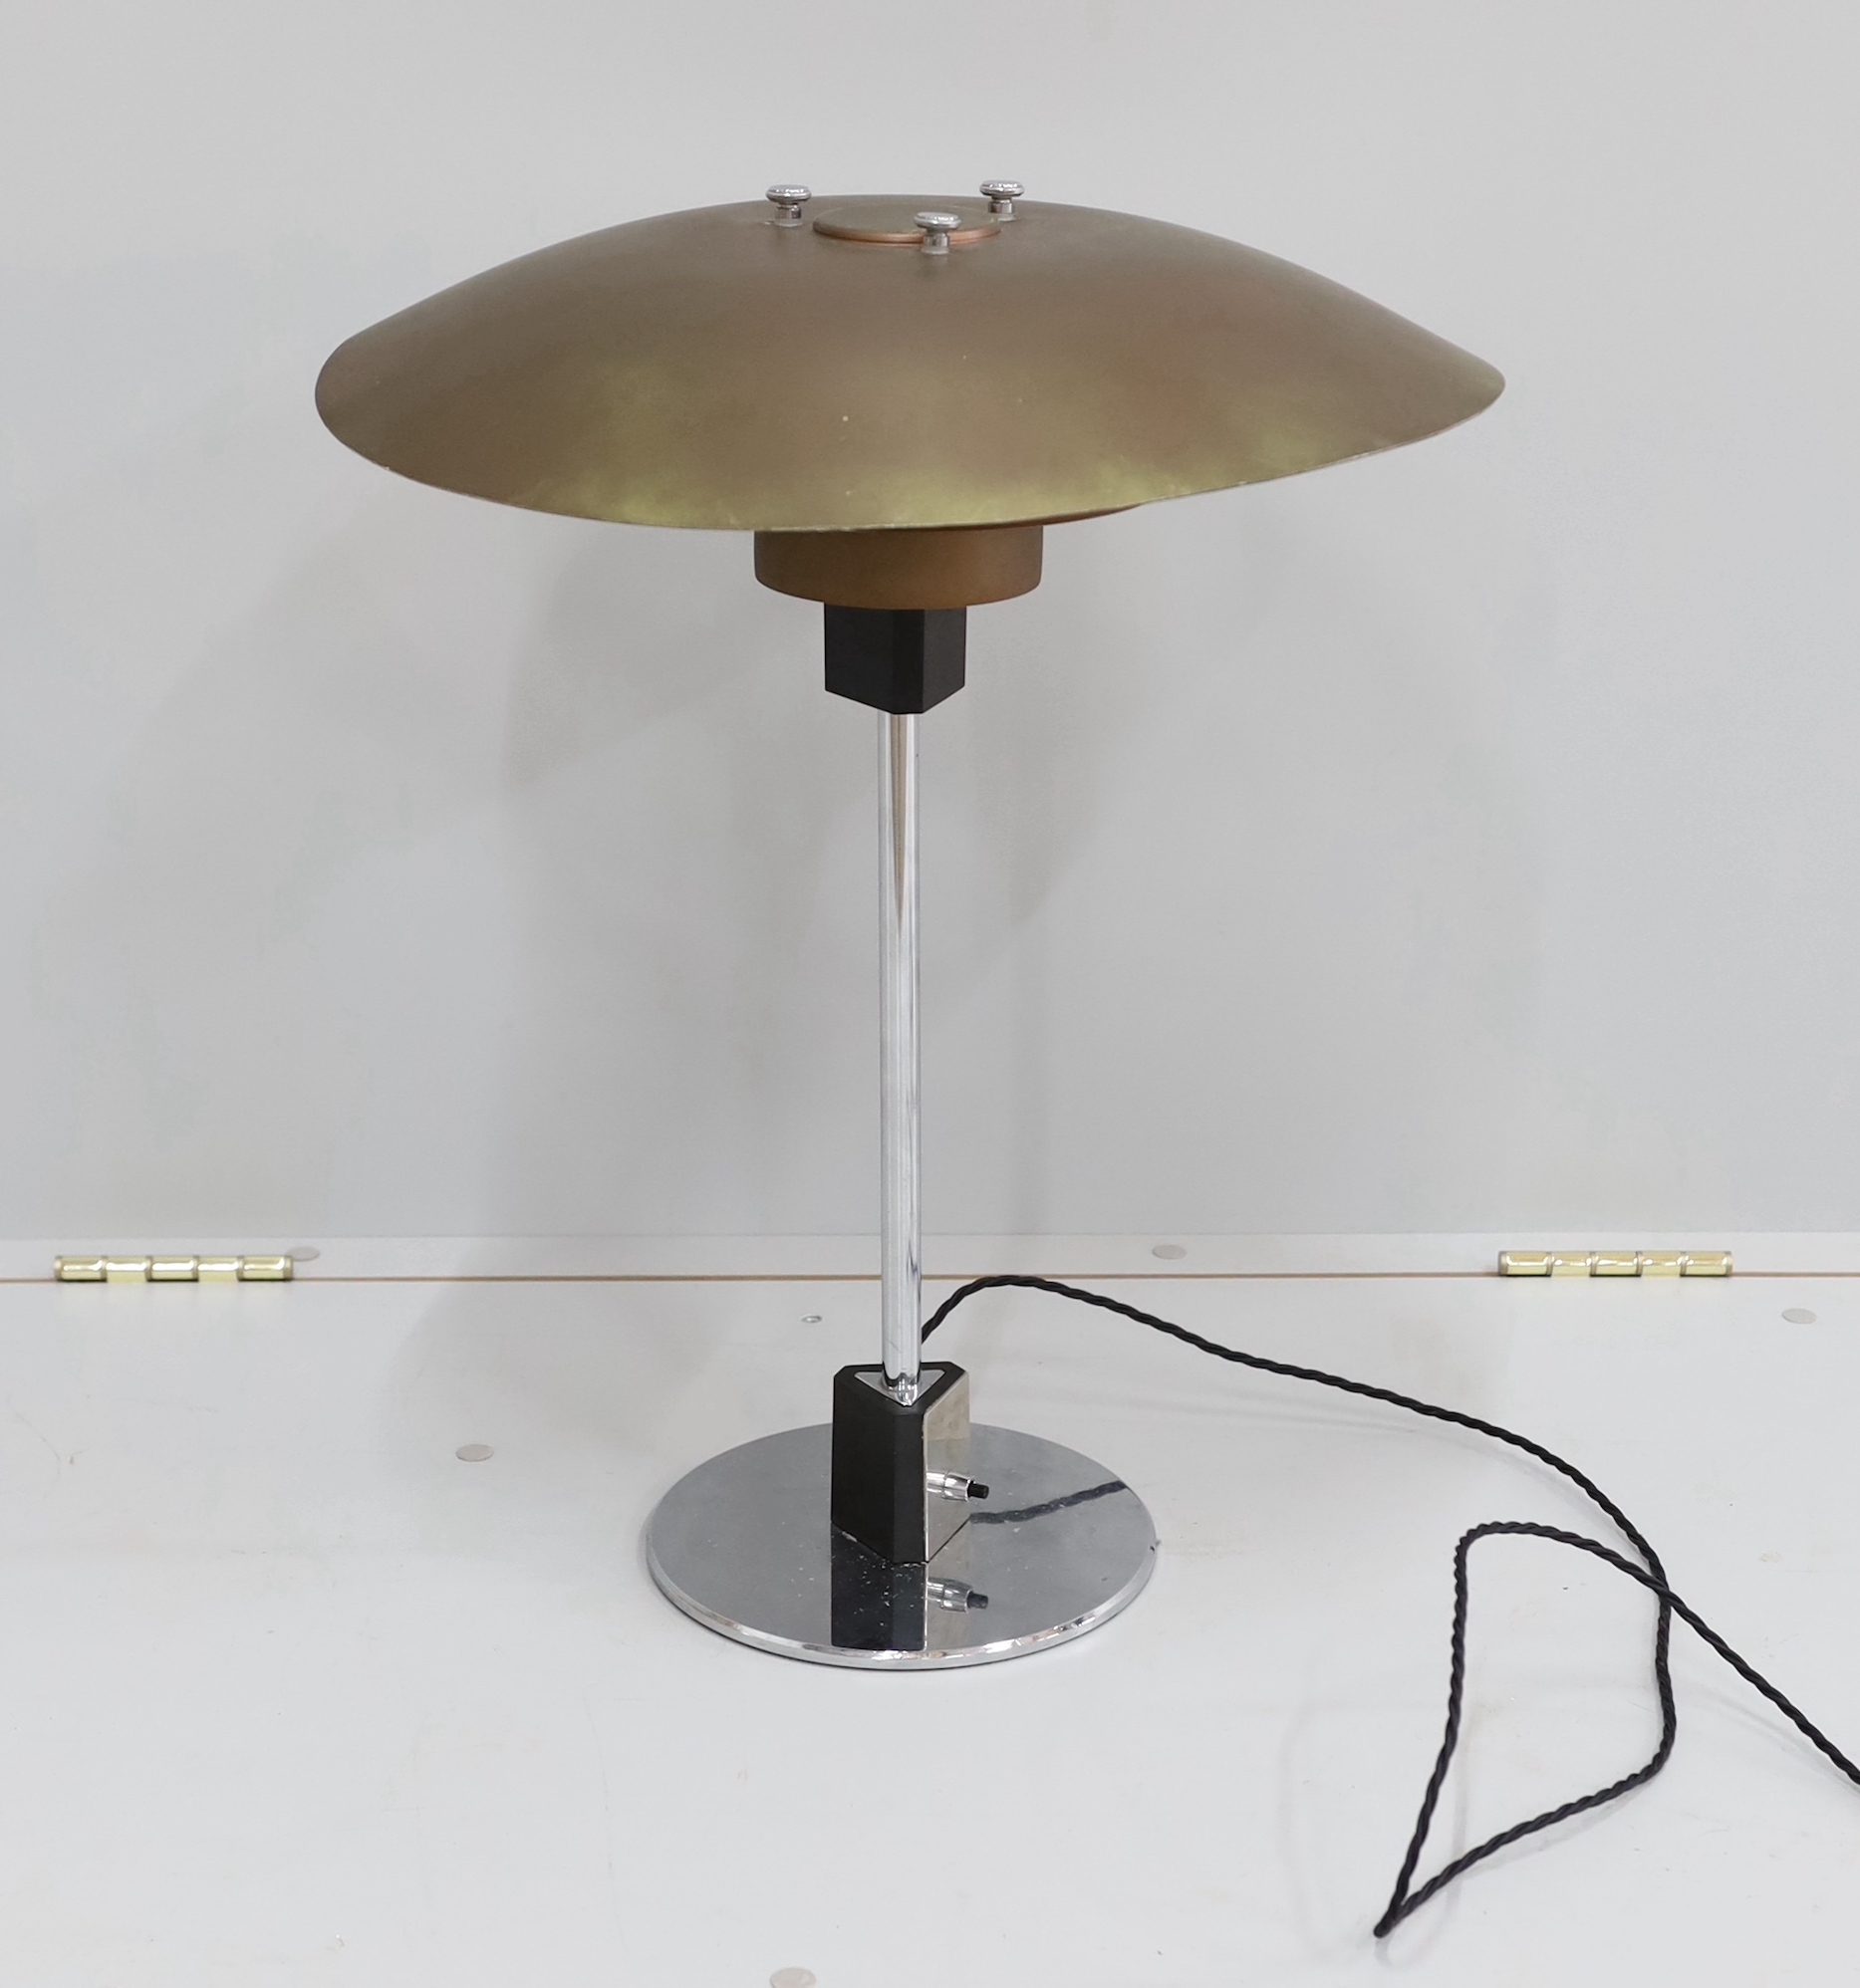 A PH 43 lamp by Poul Henningsen for Louis Poulsen 1980's, height 54cm